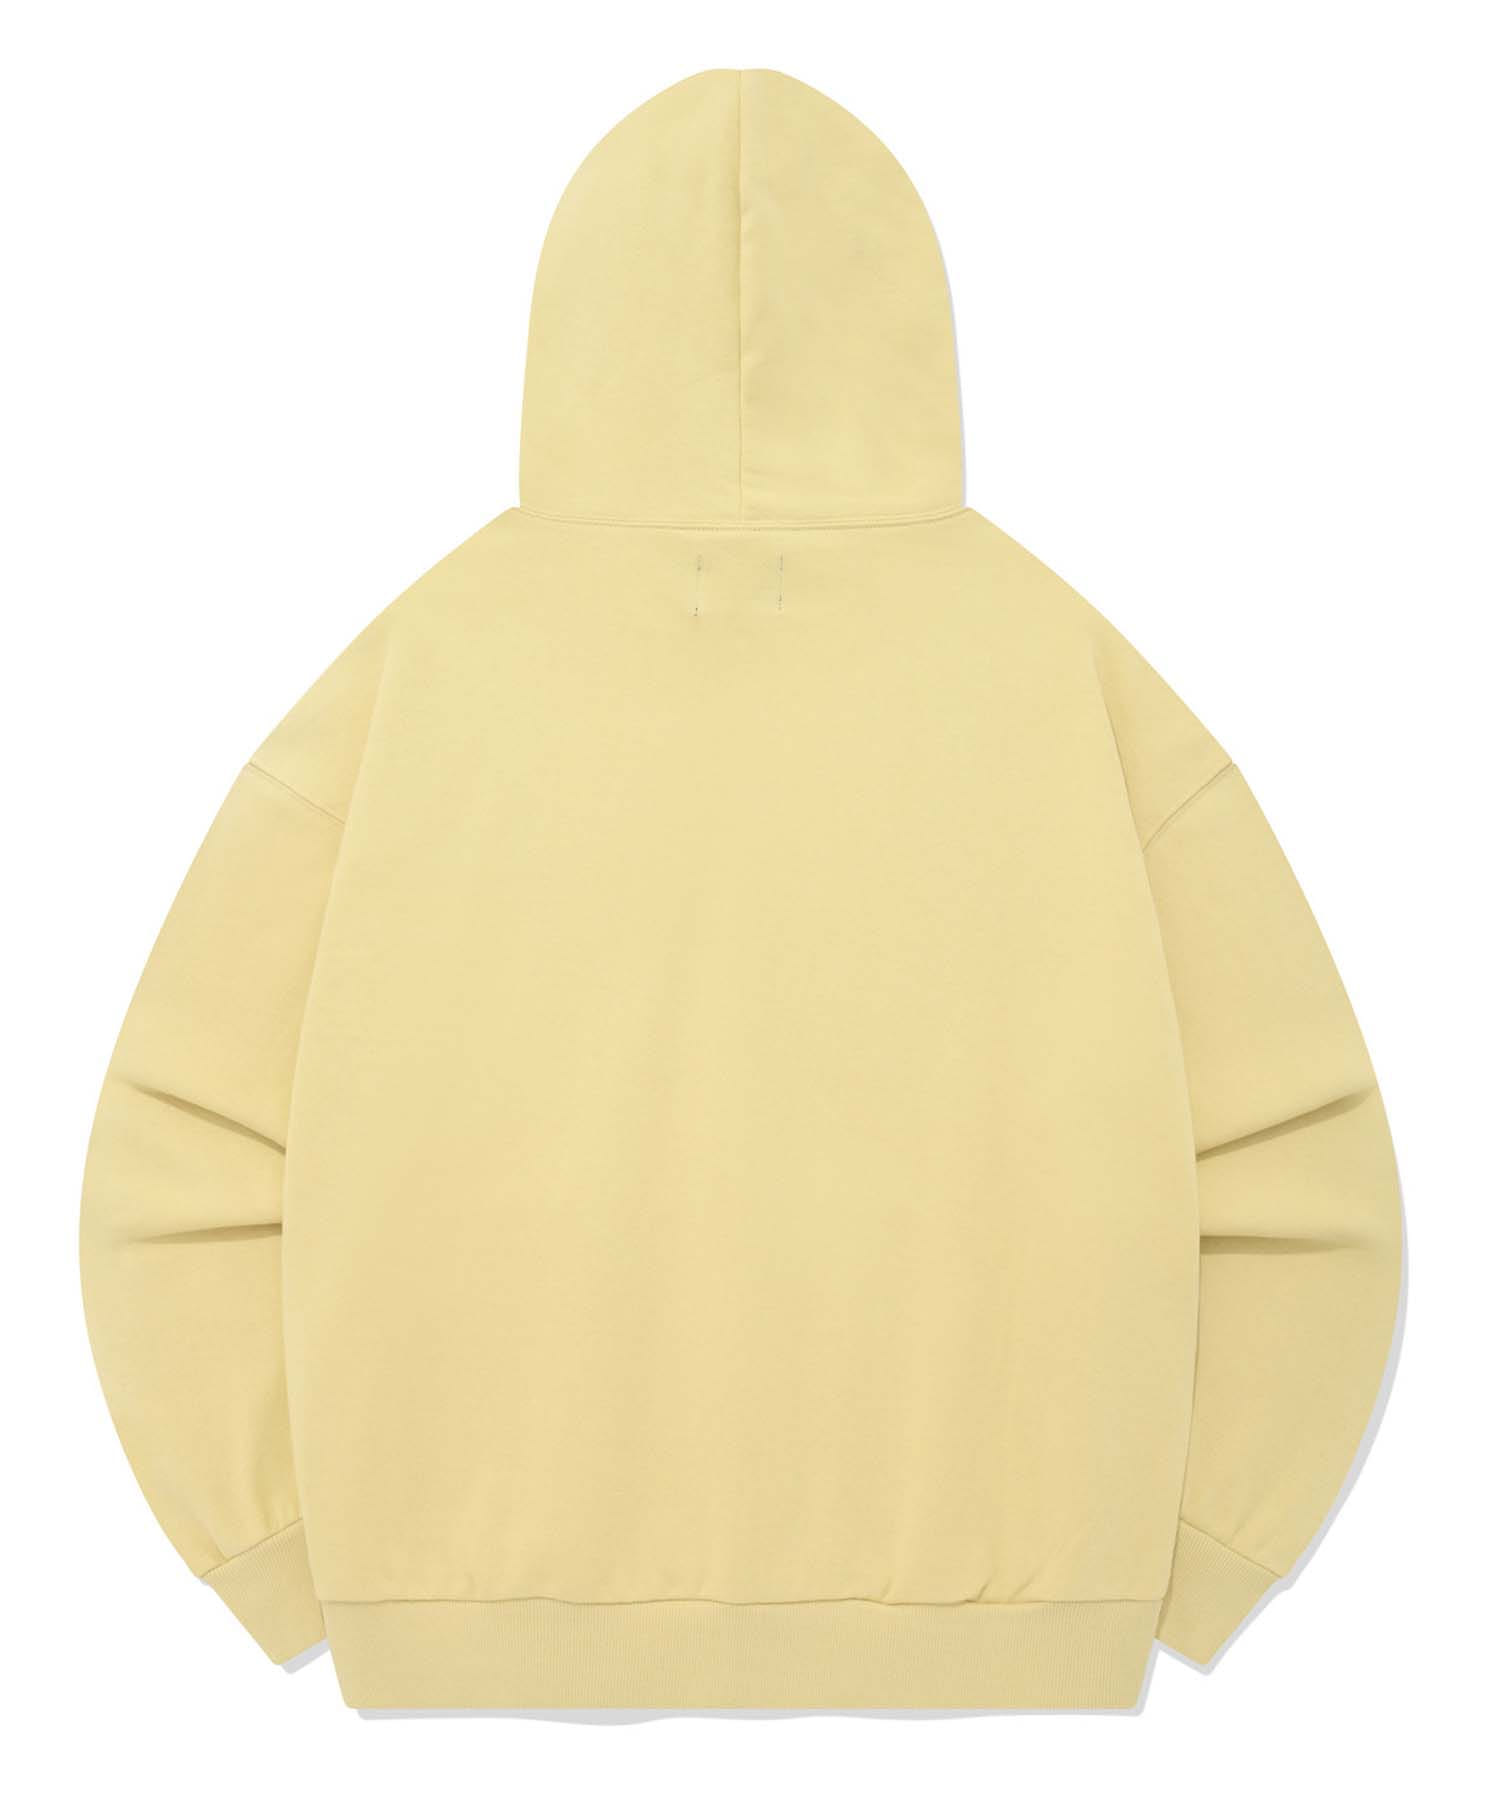 TWO DOGS HOODIE [BUTTER]